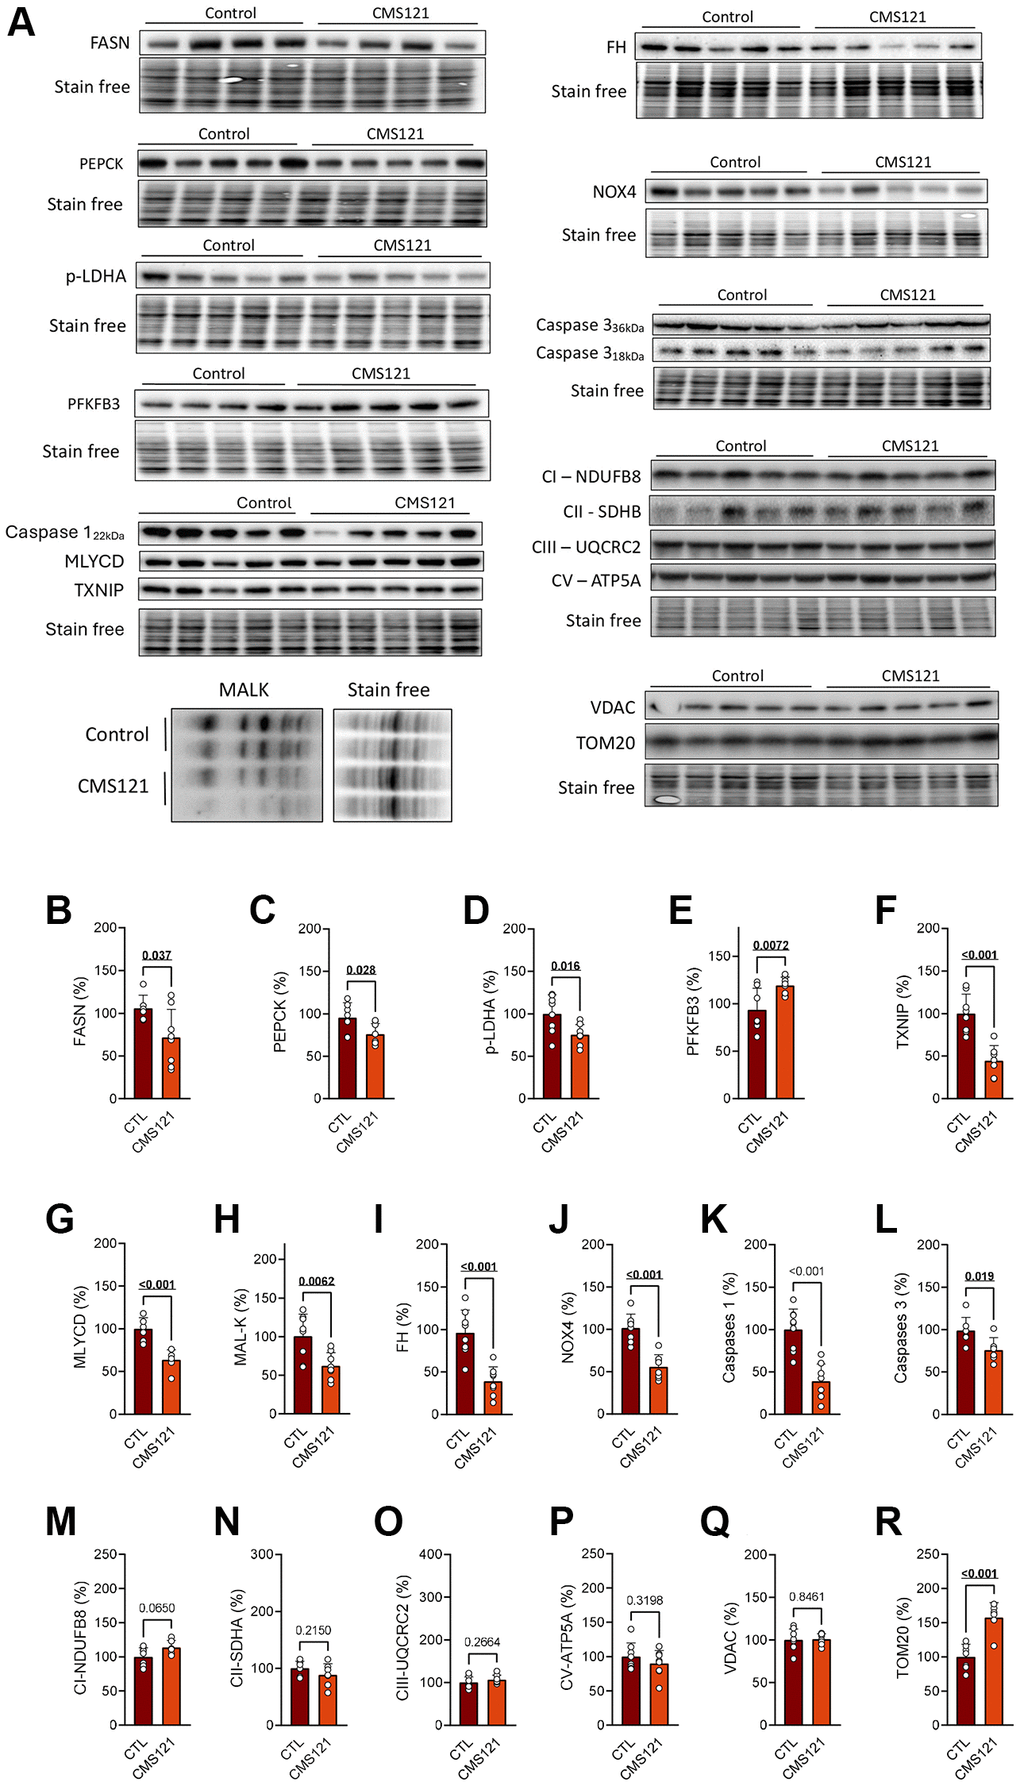 Liver protein markers were evaluated in mice fed with CMS121 for 6 months. Representative blot images (A), and the corresponding quantification (B–R) of metabolism markers in the hepatic tissue: FASN (B), PEPCK (C), p-LDH-A (D), PFKFB3 (E), TXNIP (F), MLYCD (G), malonylation of proteins at lysine residues (MAL-K, (H)), FH (I), Nox4 (J), caspase 1 (K), caspase 3 (L), and markers of mitochondrial complex I ((M); NDUFB8), complex II ((N); SDHB), complex III ((O); UQCRC2), and complex V ((P); ATP5A), as well as the voltage dependent anion channel VDAC (Q), and the outer membrane translocase TOM20 (R). Liver cytosolic fractions were used for blotting, except for the mitochondrial markers (M–R), FH (I), and NOX4 (J) that used mitochondrial fractions. Data are presented as mean ± SD (N = 6–8). Bold underlined p-values indicate statistical differences.